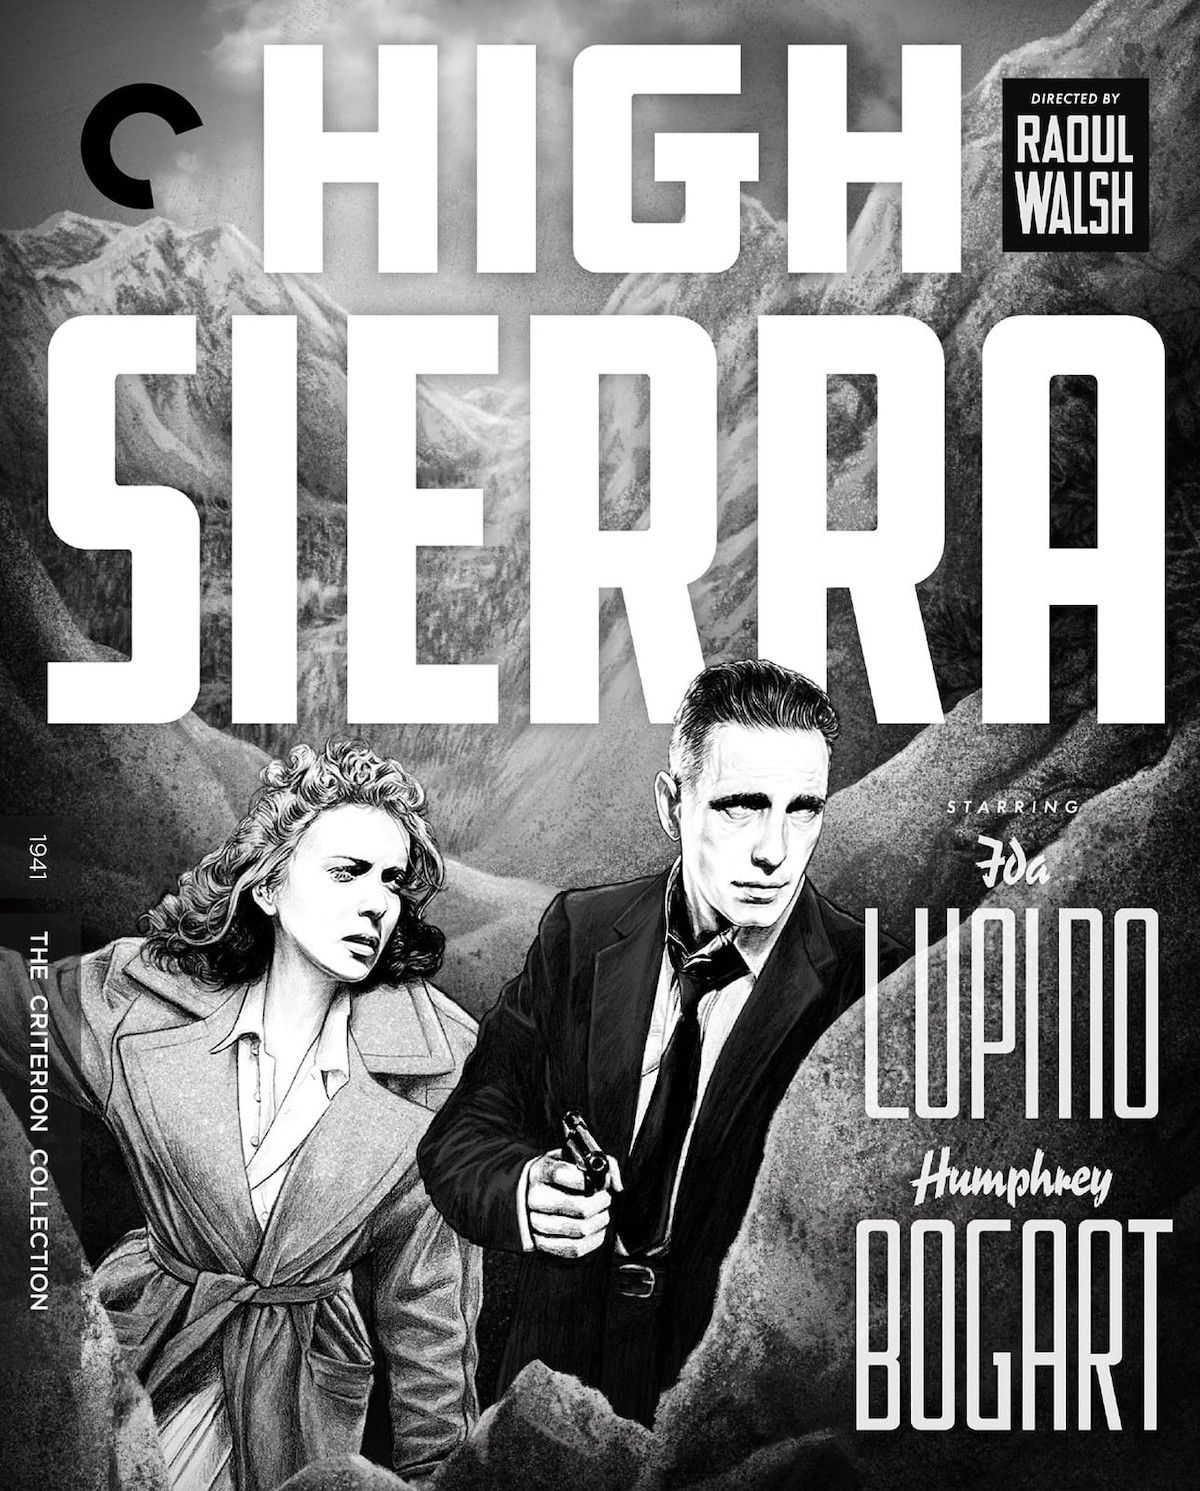 high-sierra-criterion-collection